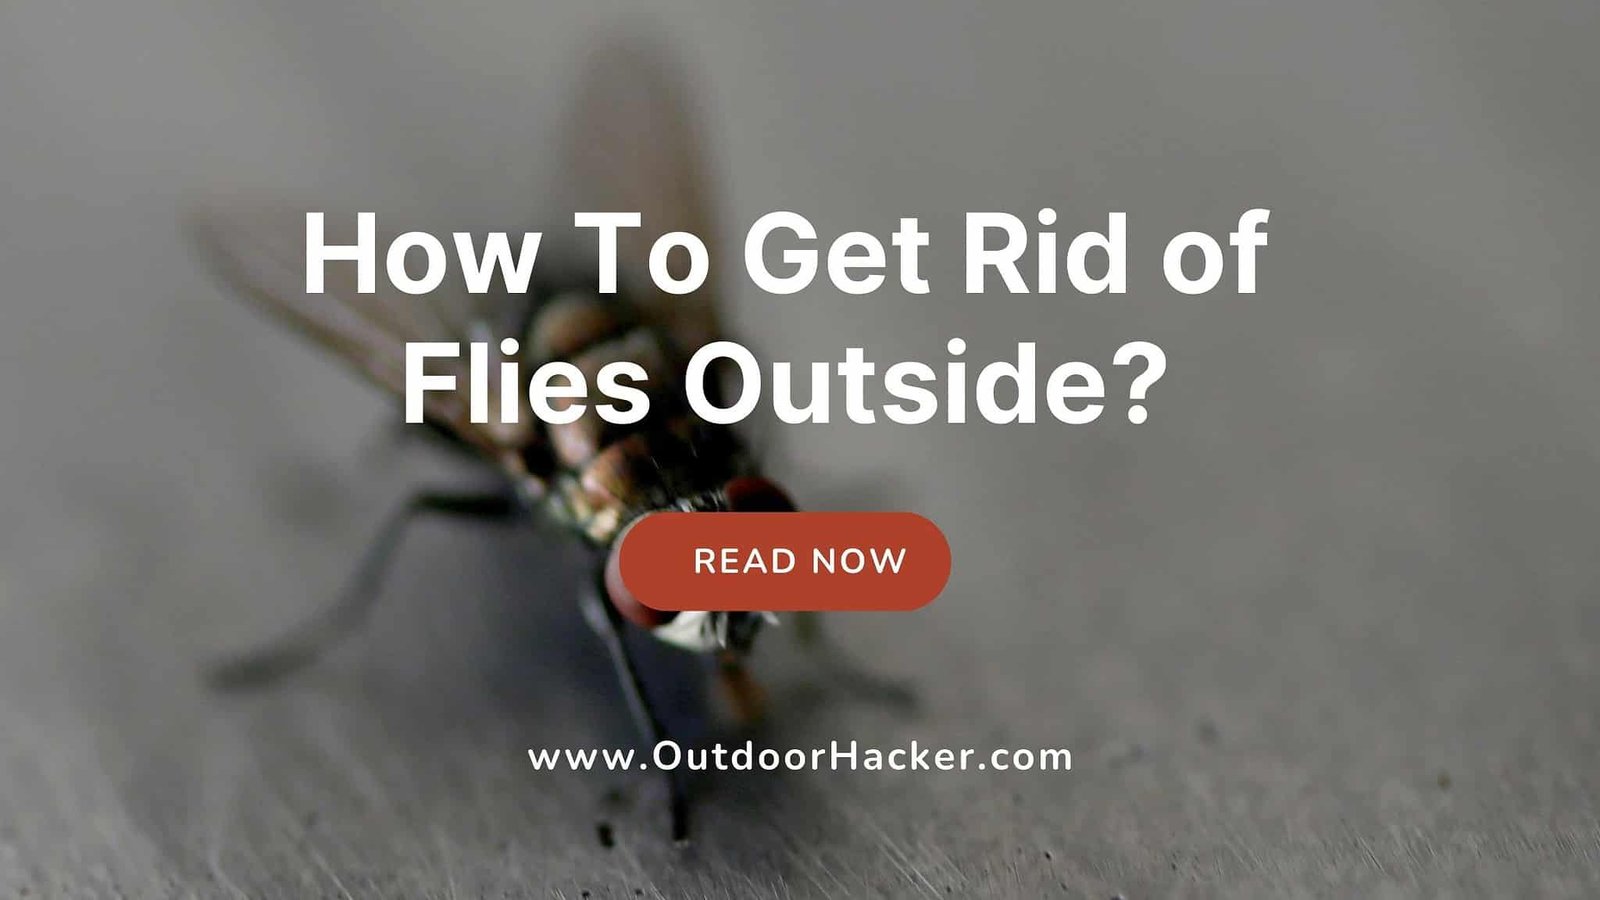 How To Get Rid of Flies Outside